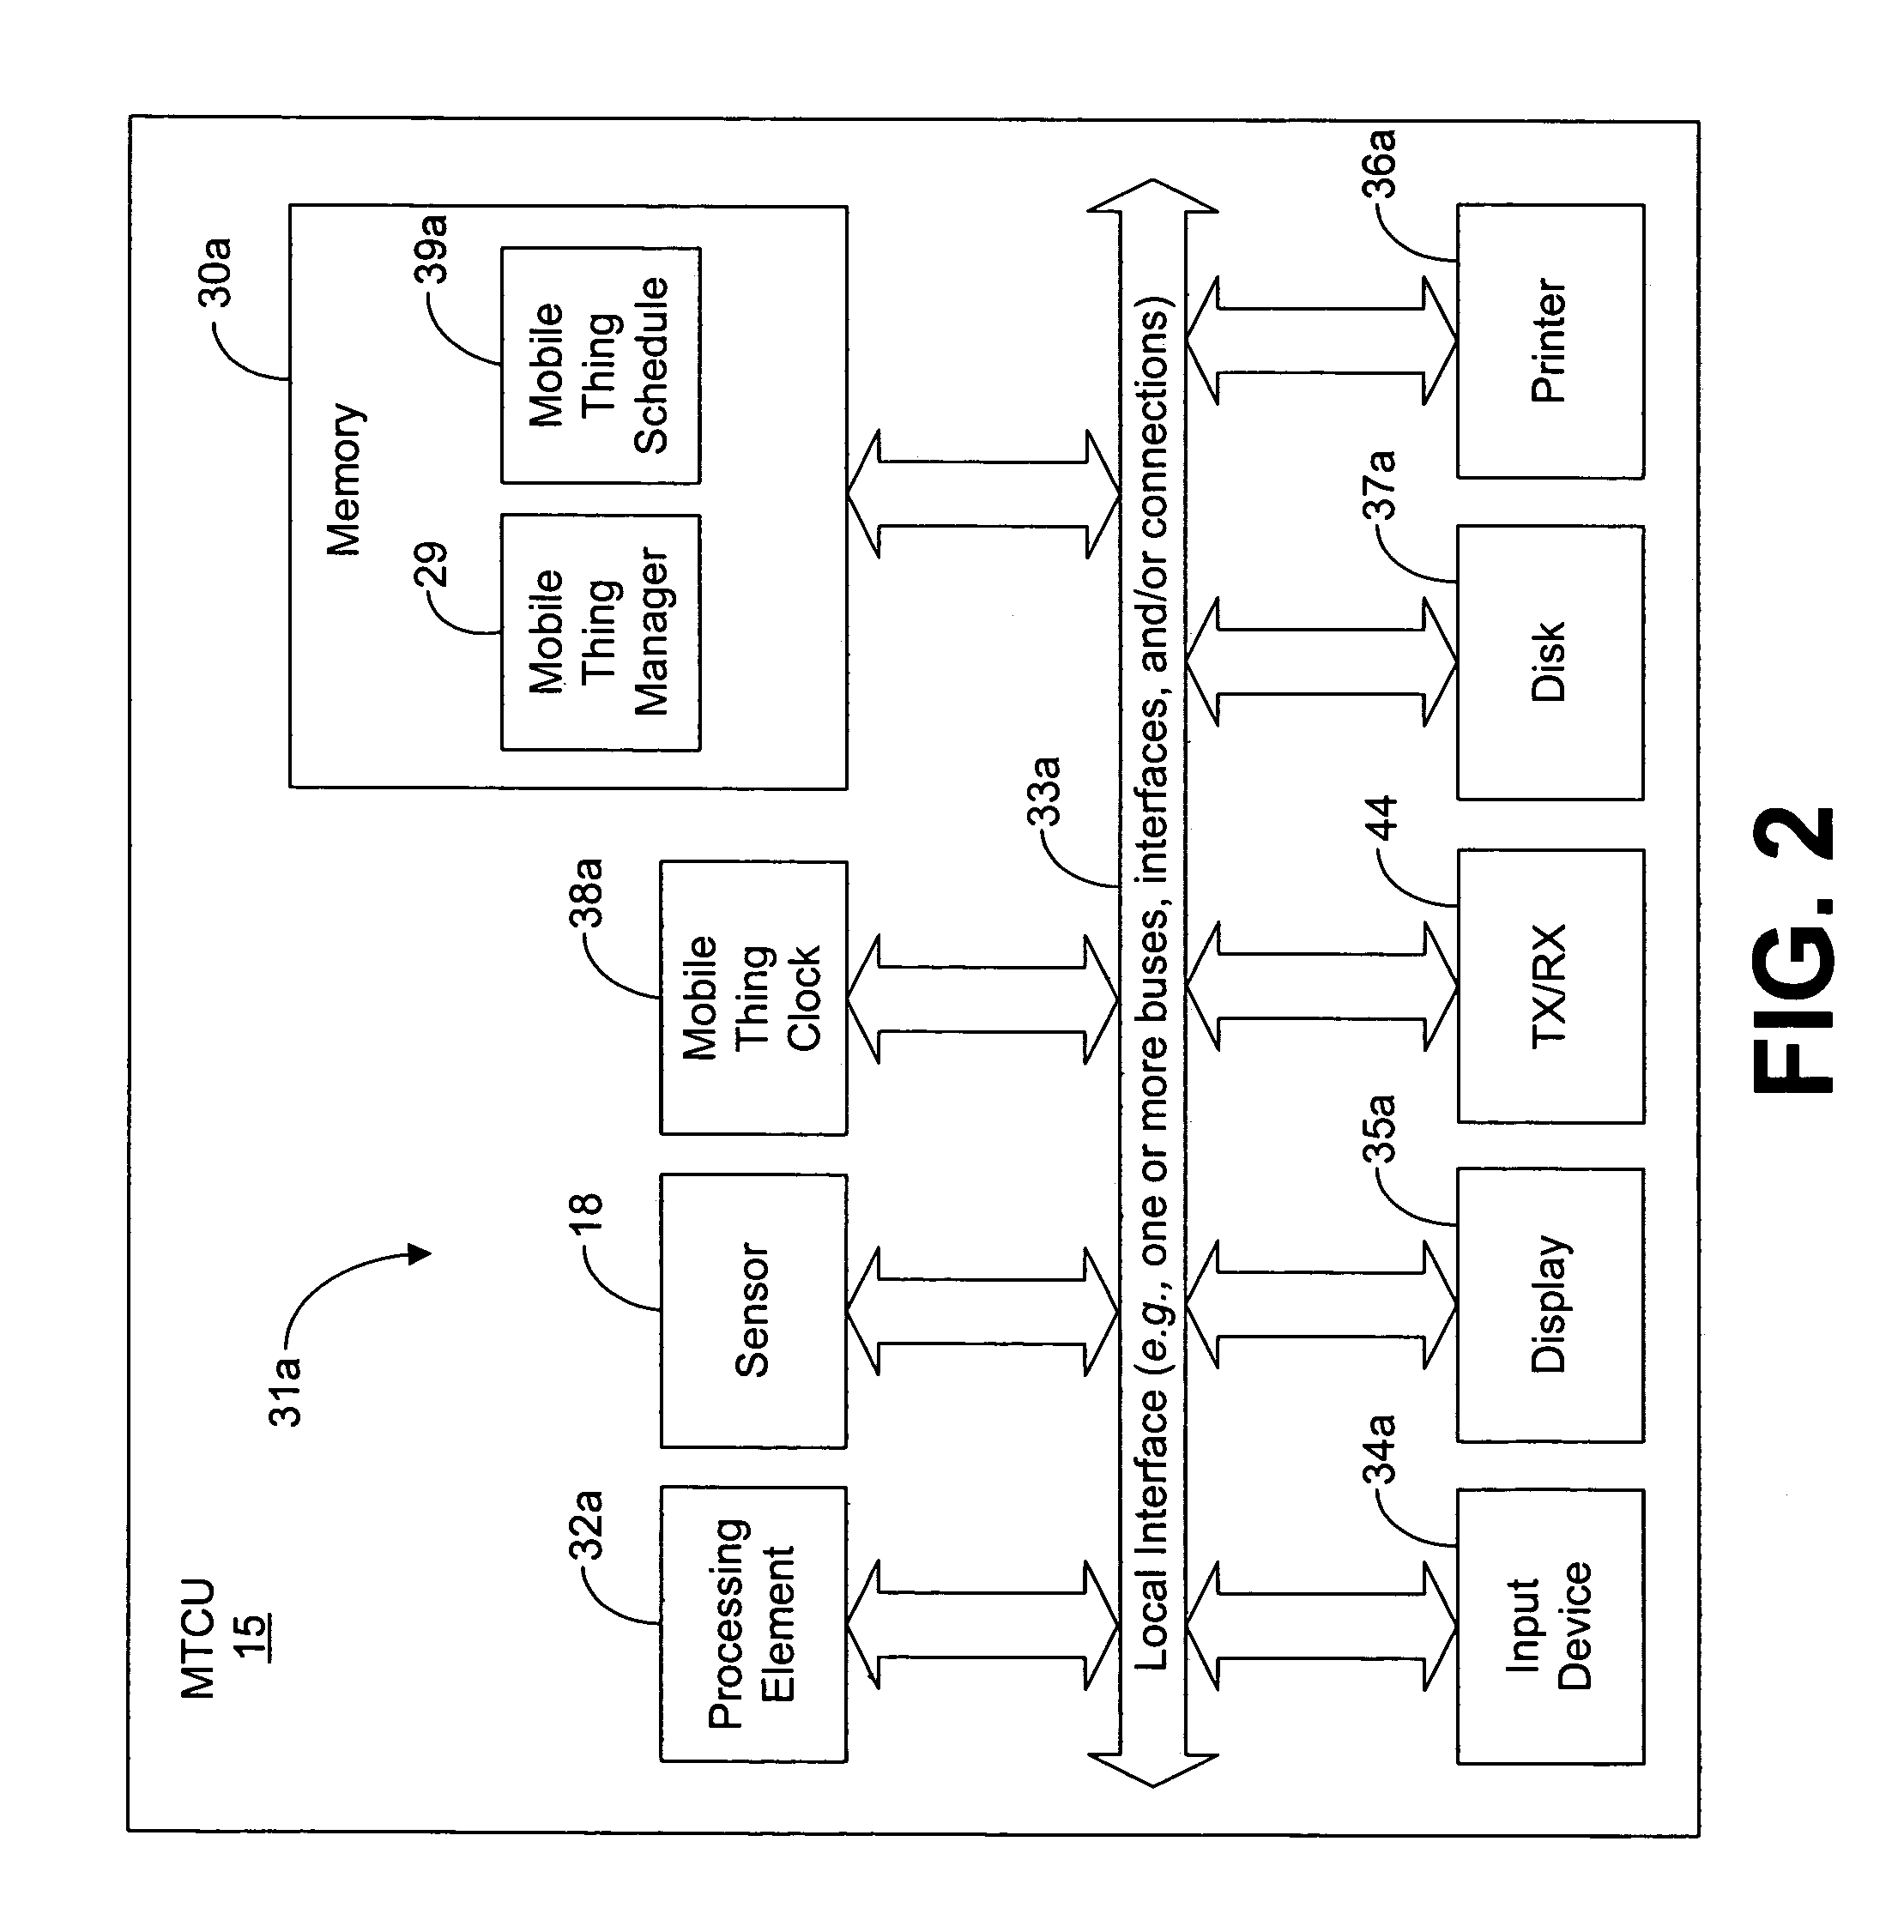 Response systems and methods for notification systems